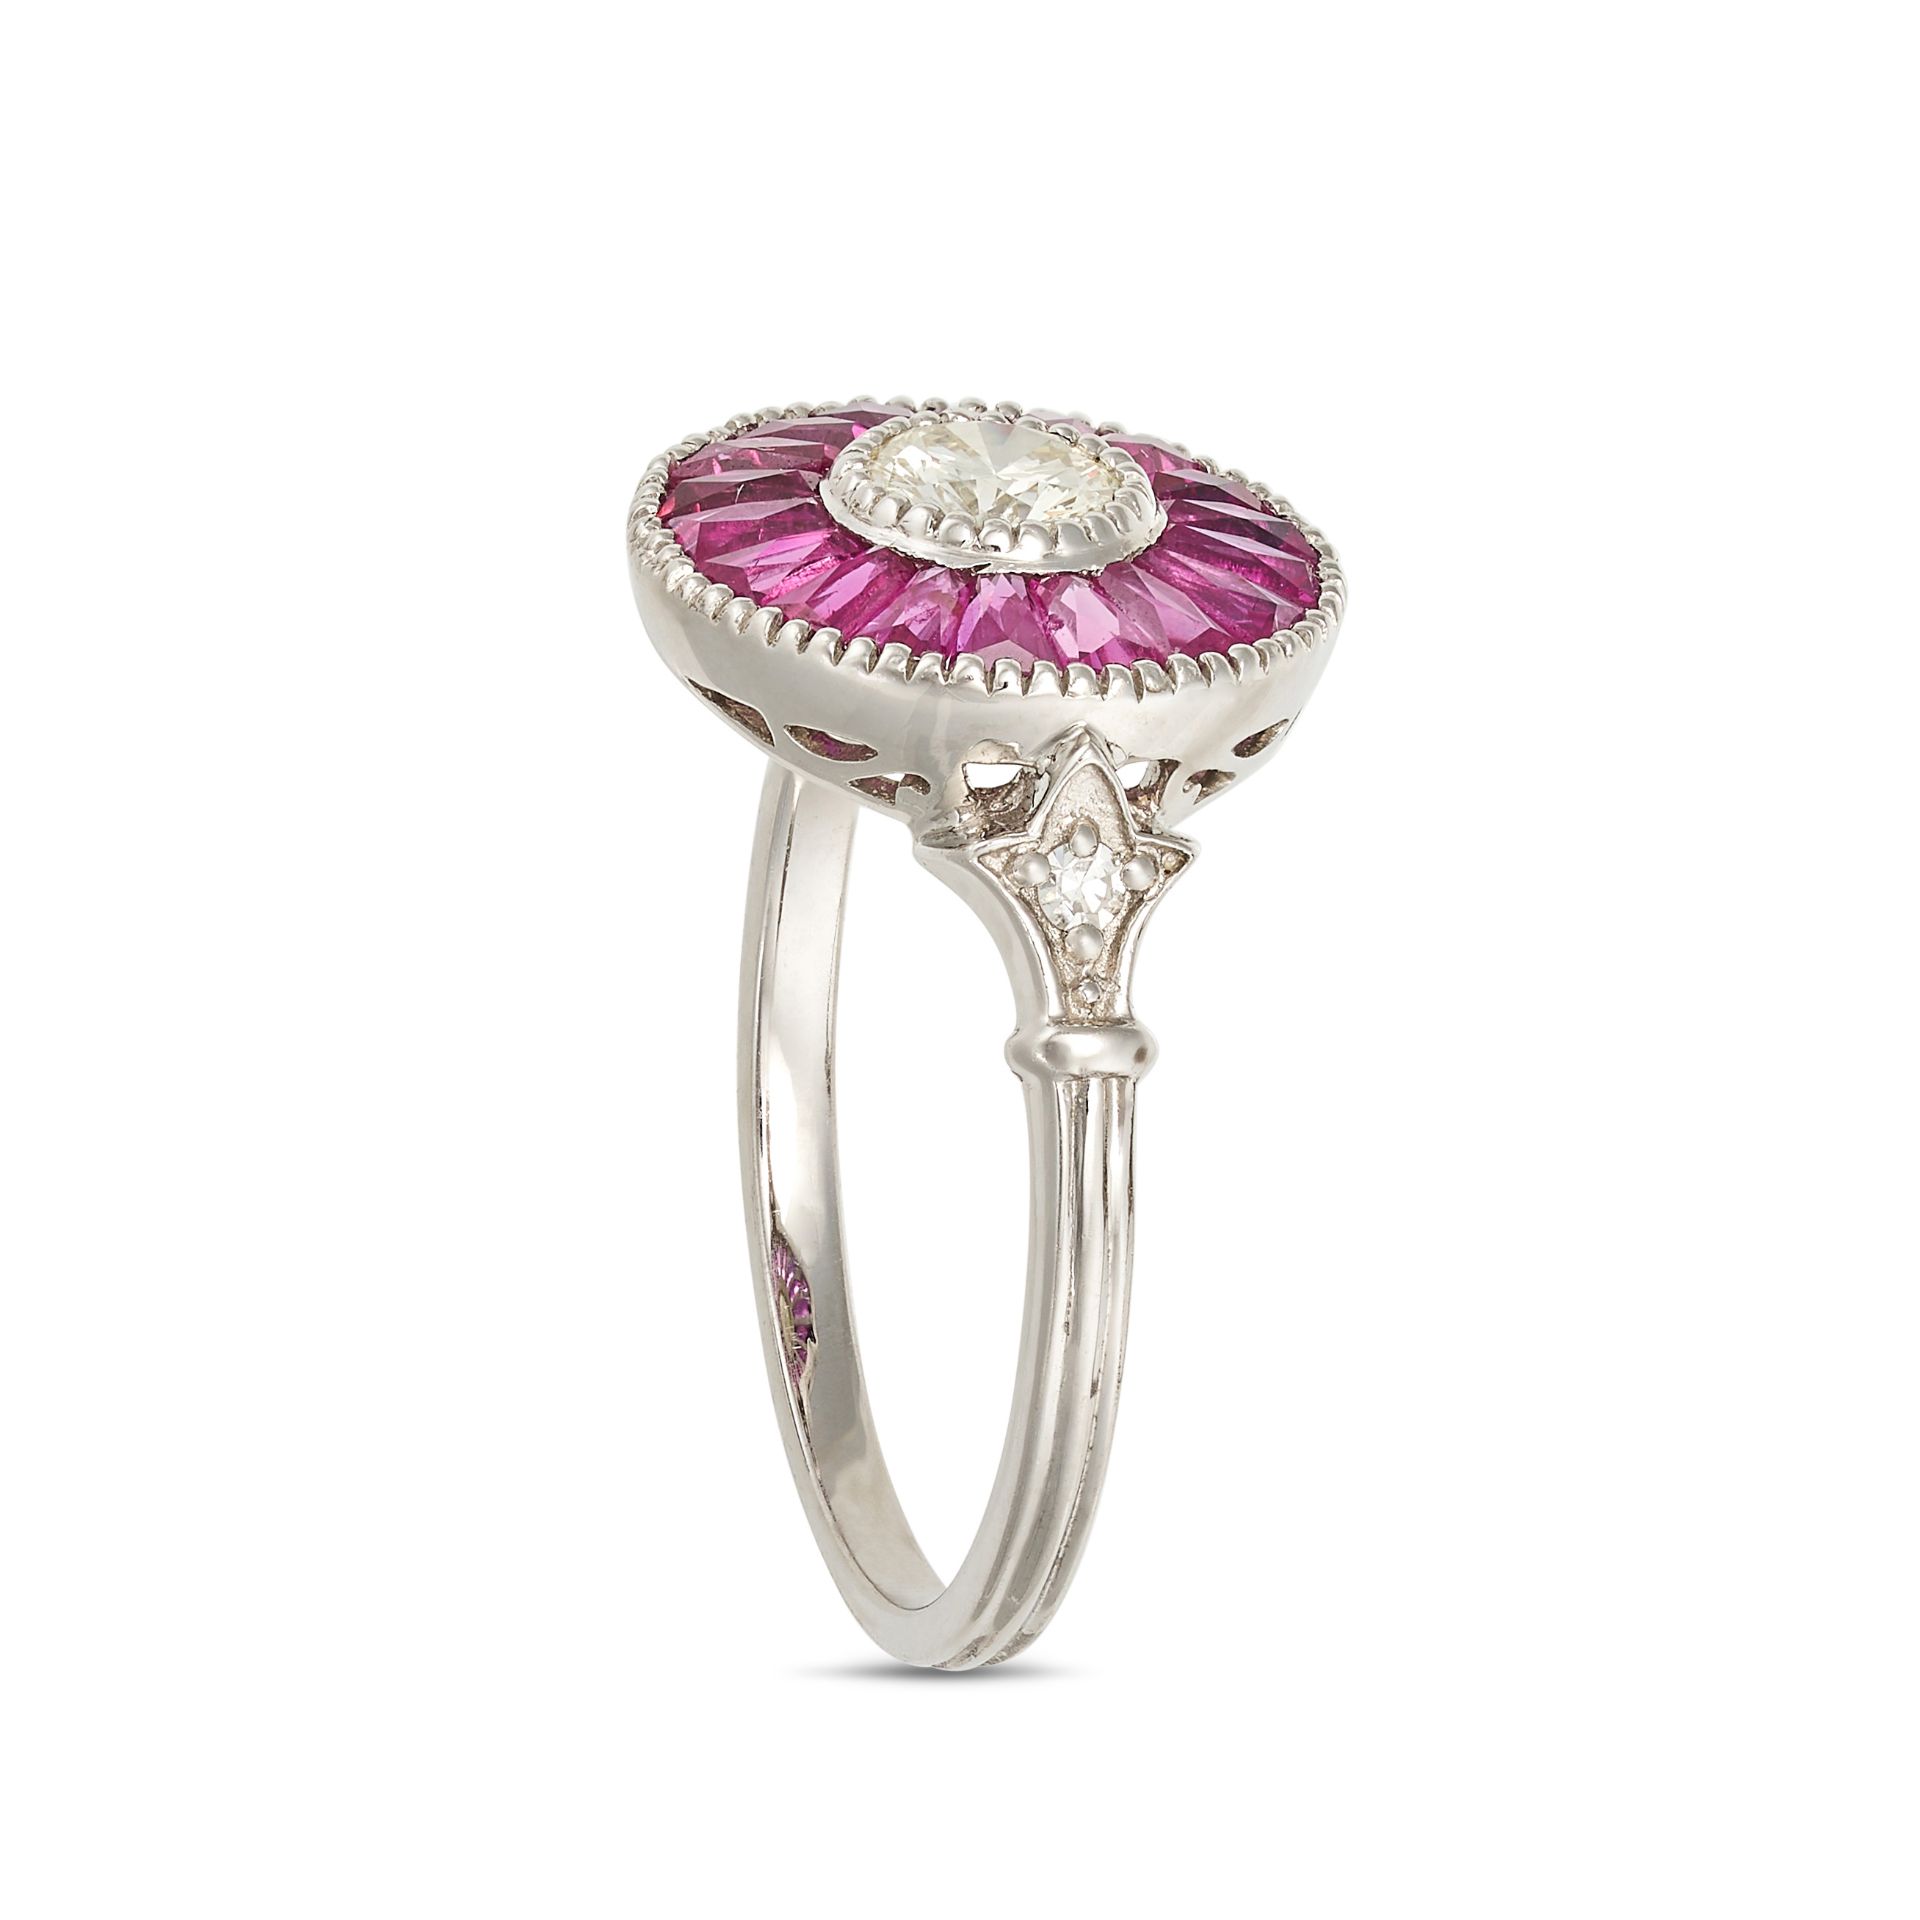 A RUBY AND DIAMOND TARGET RING set with a round brilliant cut diamond of approximately 0.23 carat... - Image 2 of 2